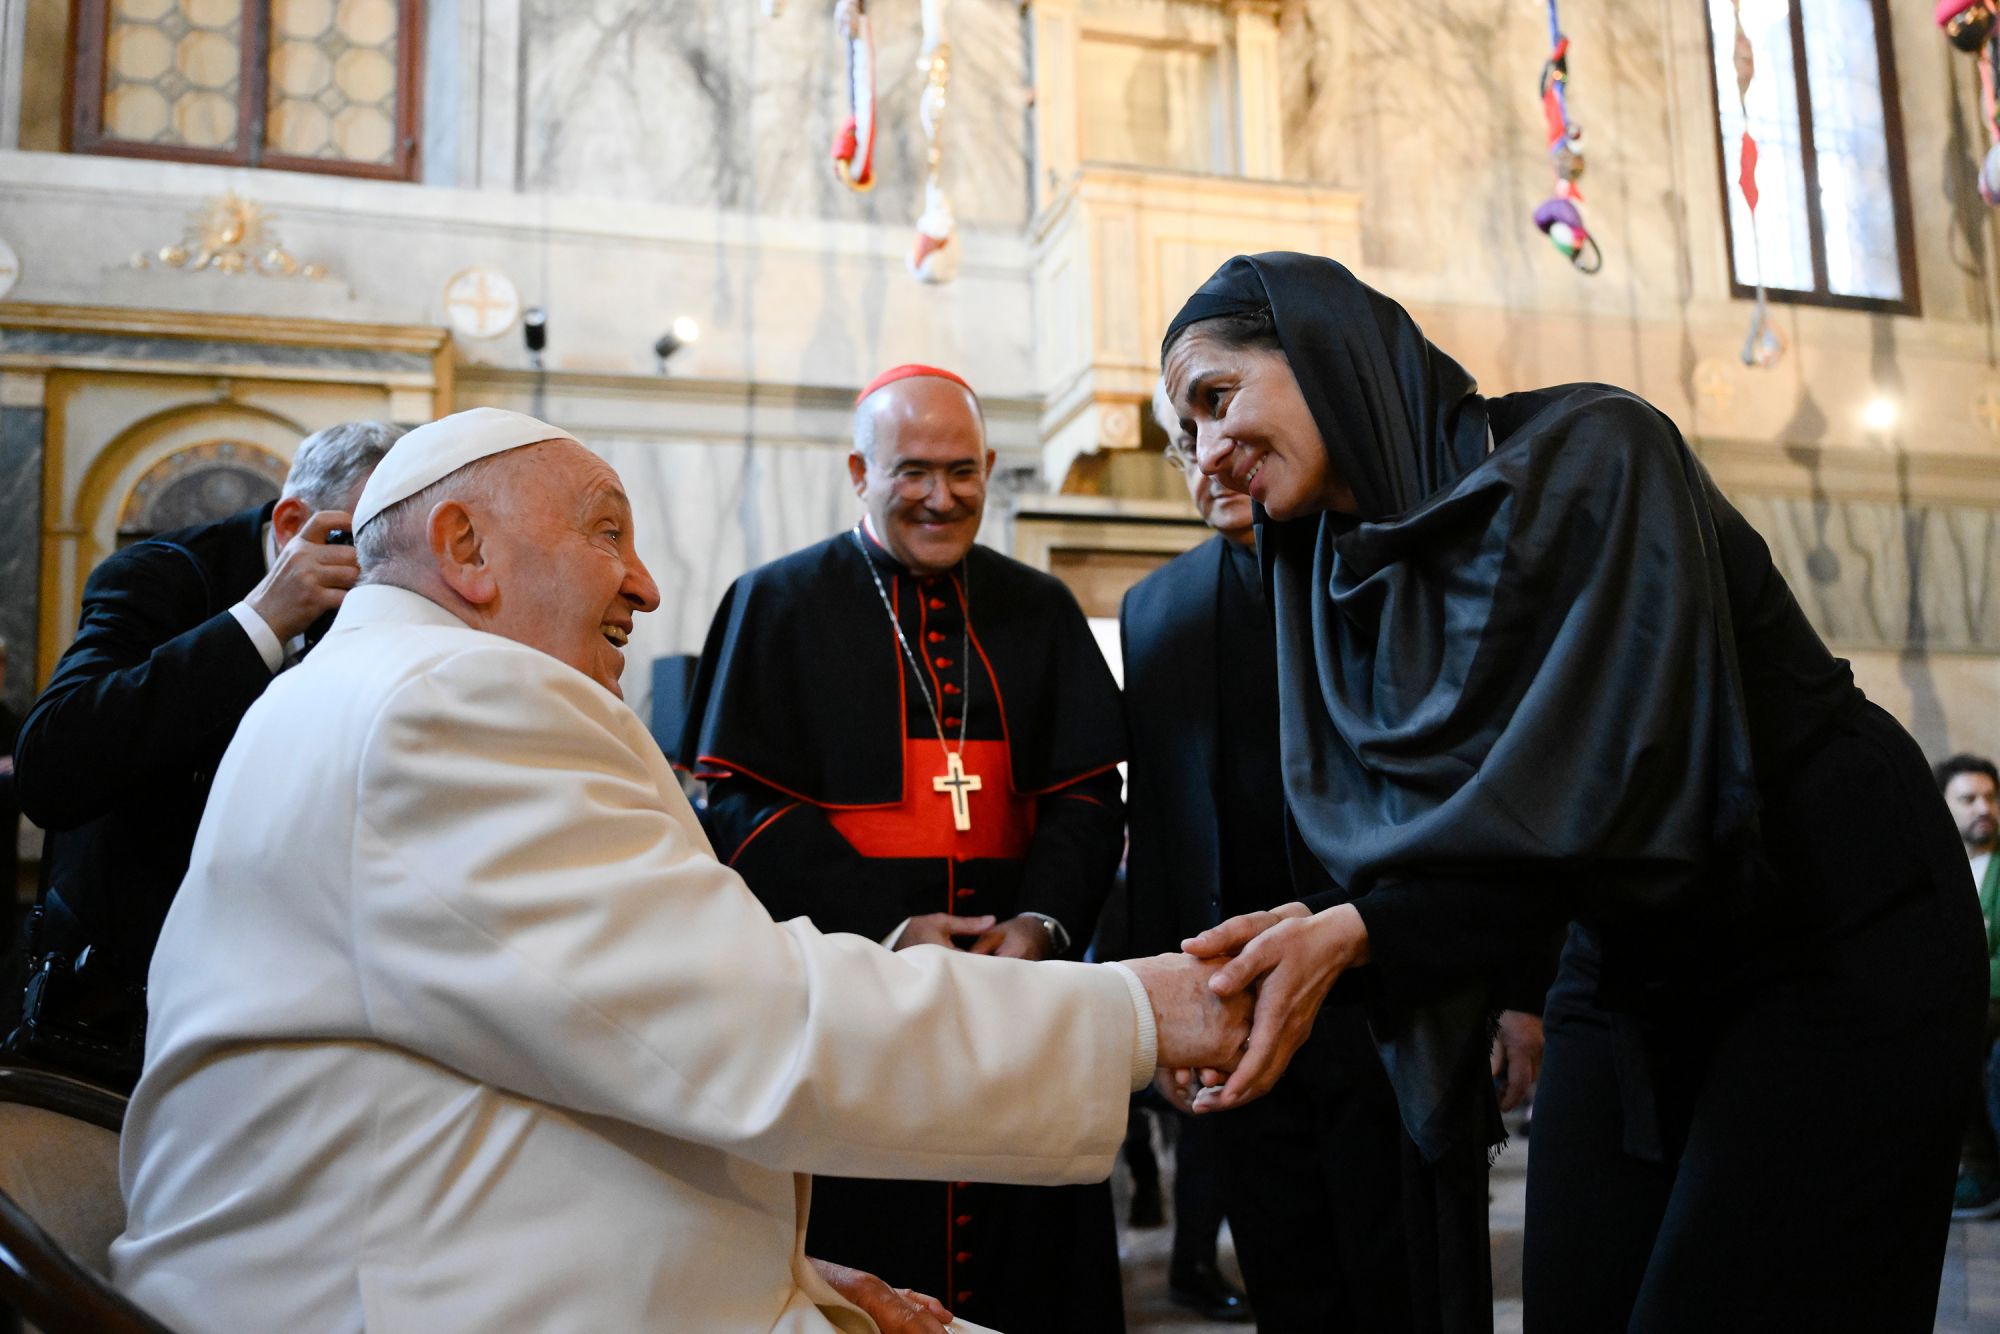 Pope Francis greets an artist in the Church of La Maddalena in the Giudecca's women's prison facility in Venice, Italy. Addressing the group, the Pope praised artists as true visionaries who can see beyond the boundaries of our world.